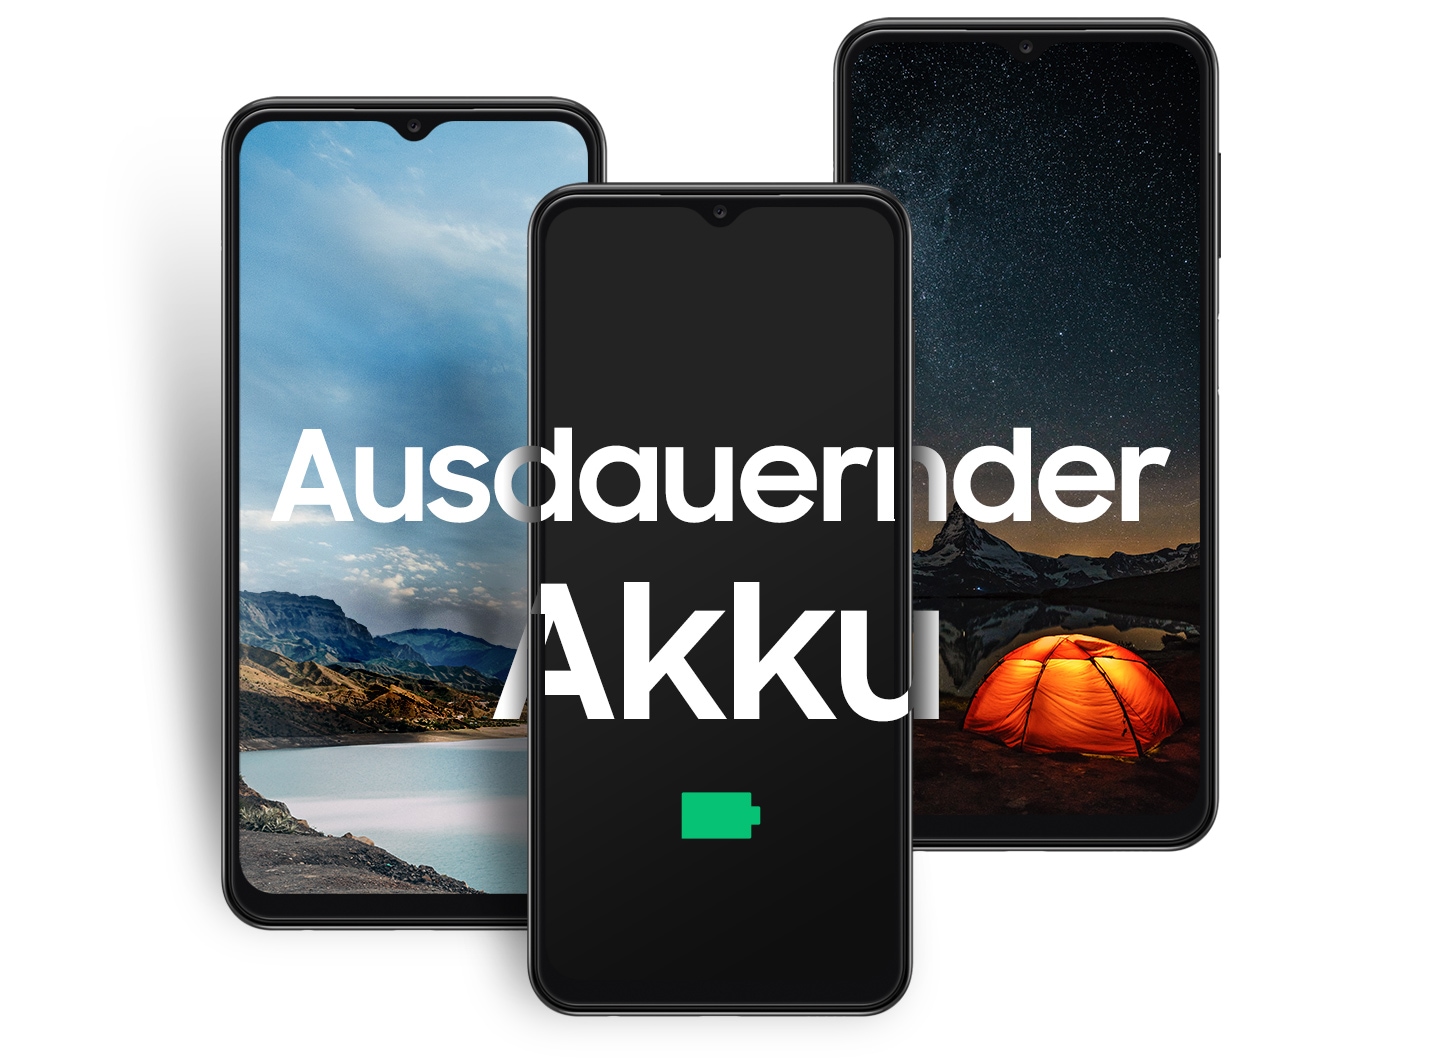 The Galaxy A13 is placed between two landscape images, with the left showing the scenery of the coast during the day and the right showing the scenery of tents and mountains at night. Text reads 2 Days Battery.